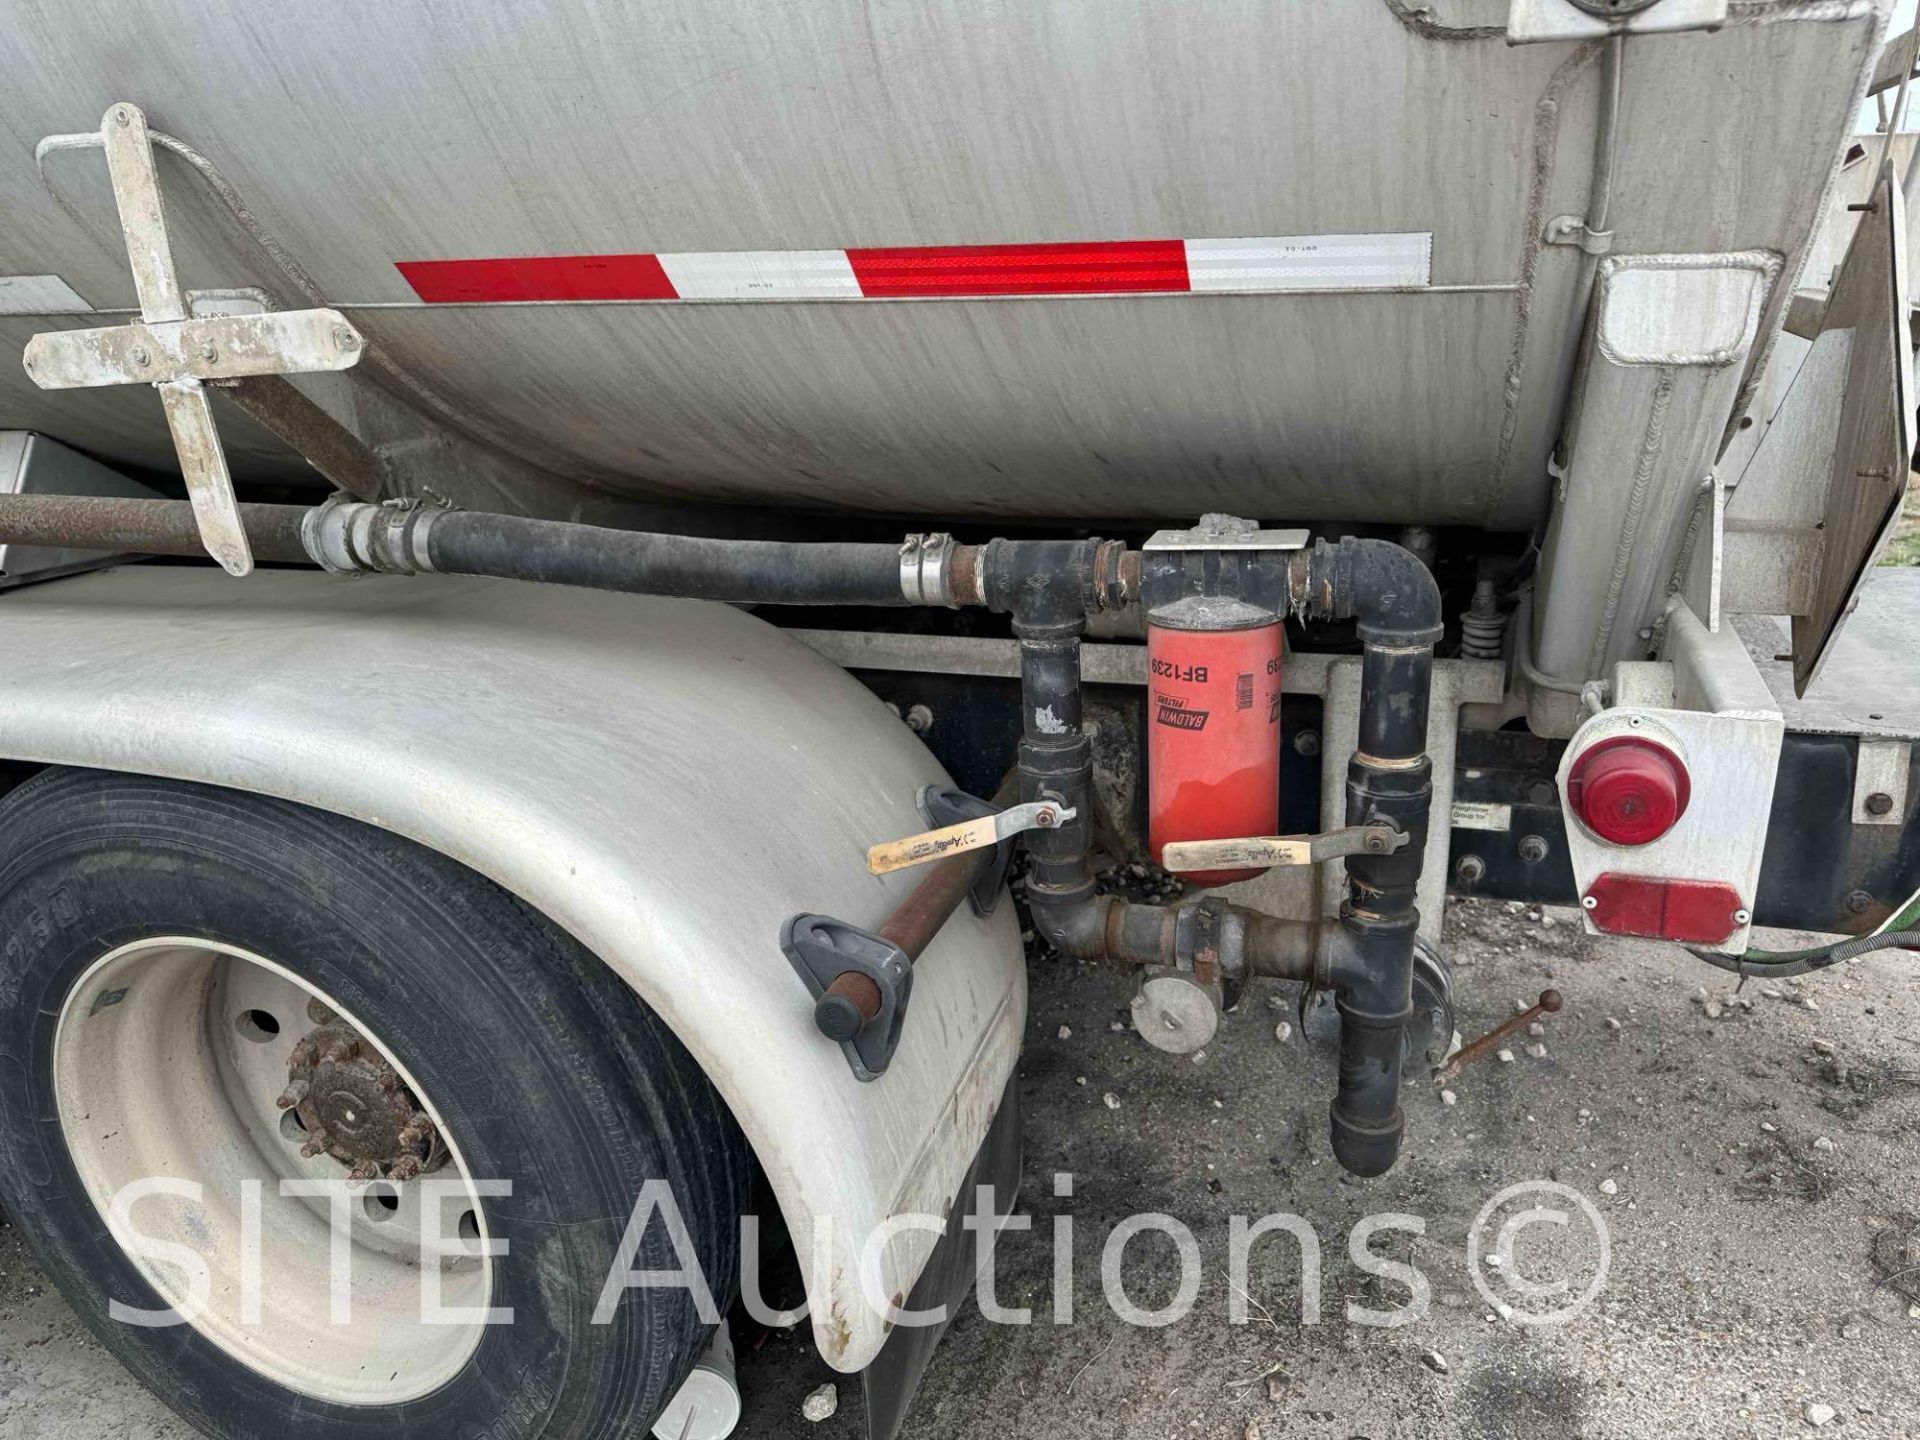 2004 Freightliner Columbia T/A Fuel Truck - Image 51 of 85